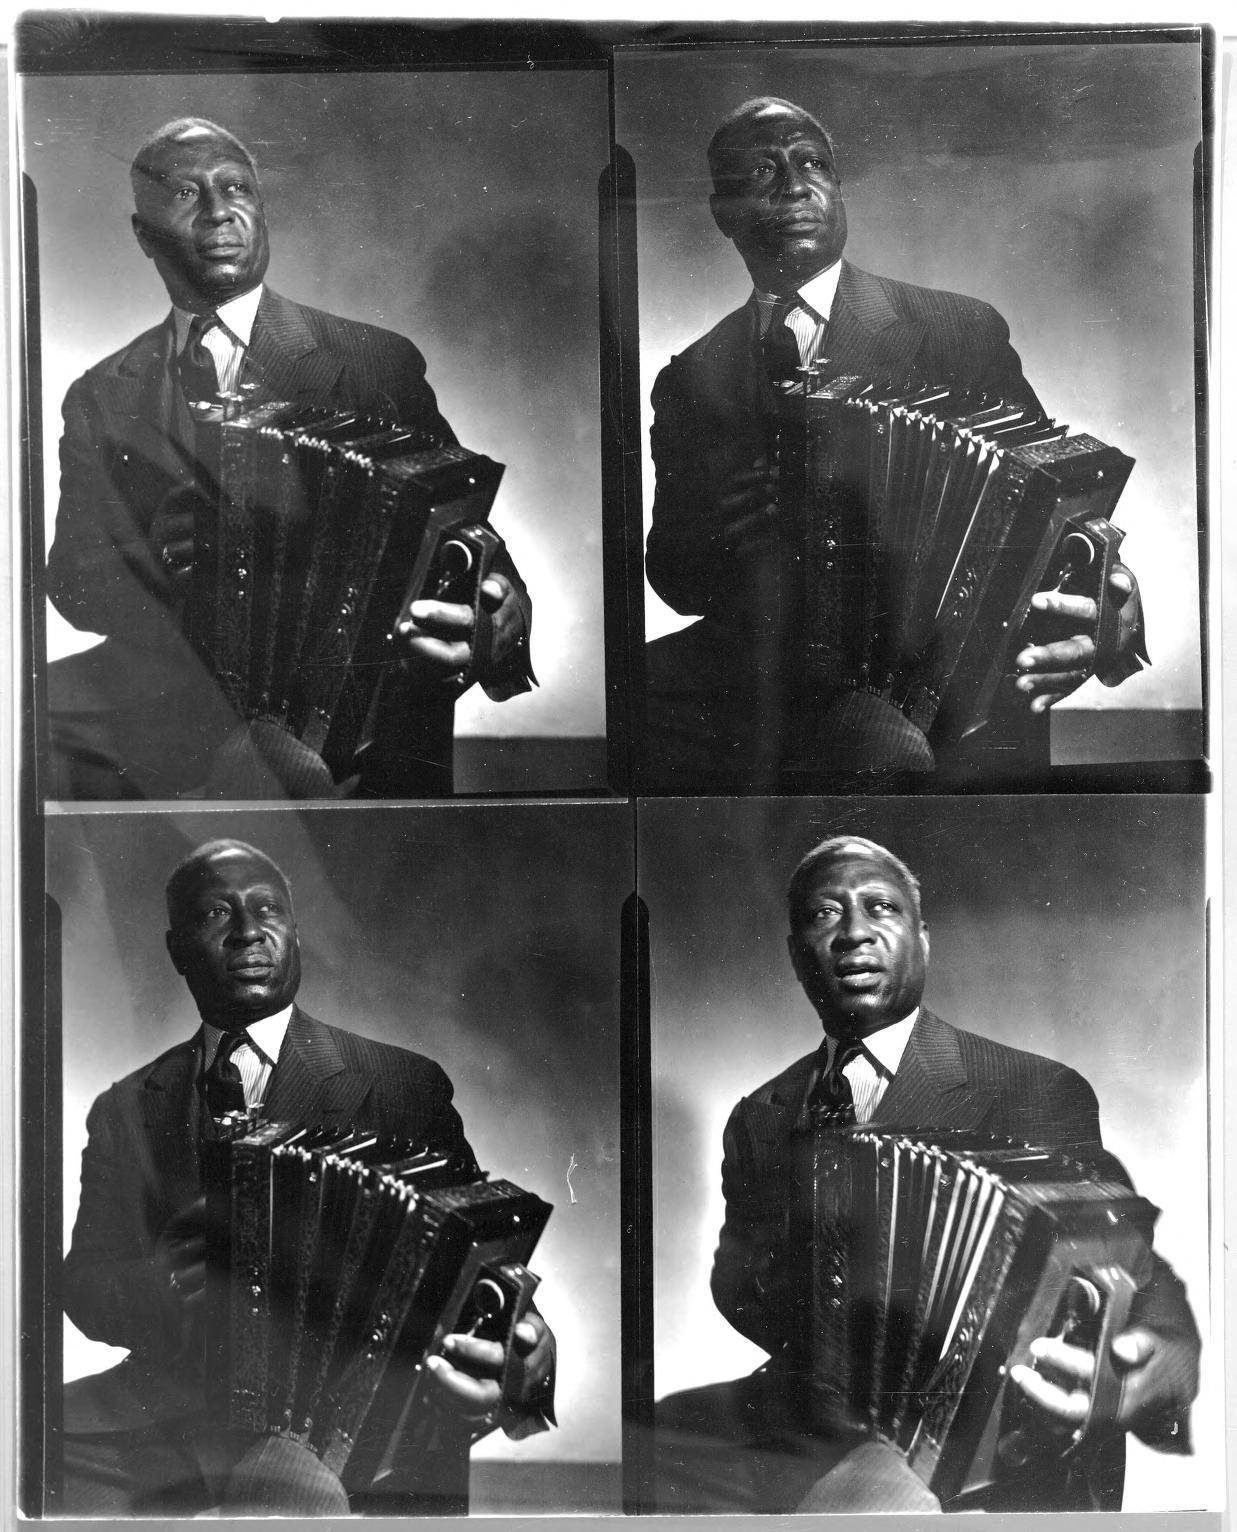 American Folk And Blues Singer Leadbelly With Accordion 1942 Illustration Wallpaper